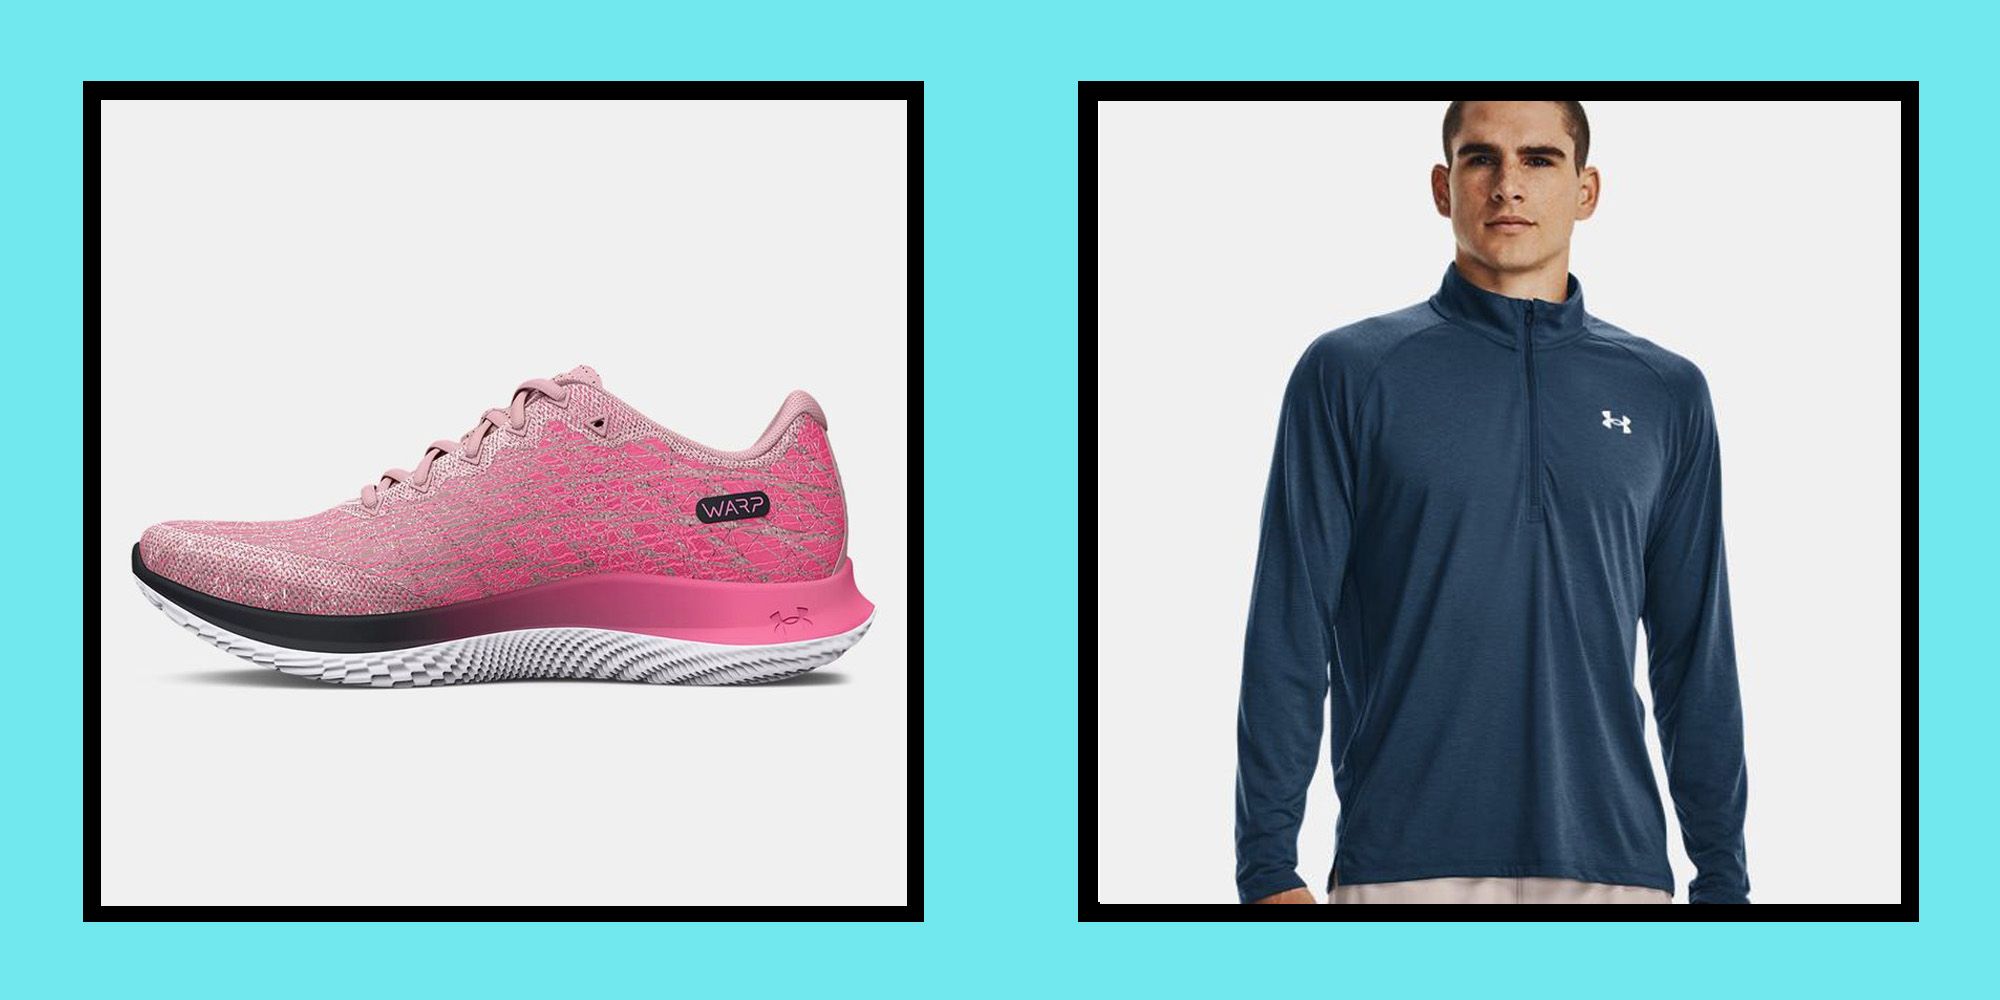 The deals for runners in the Under Armour Cyber sale